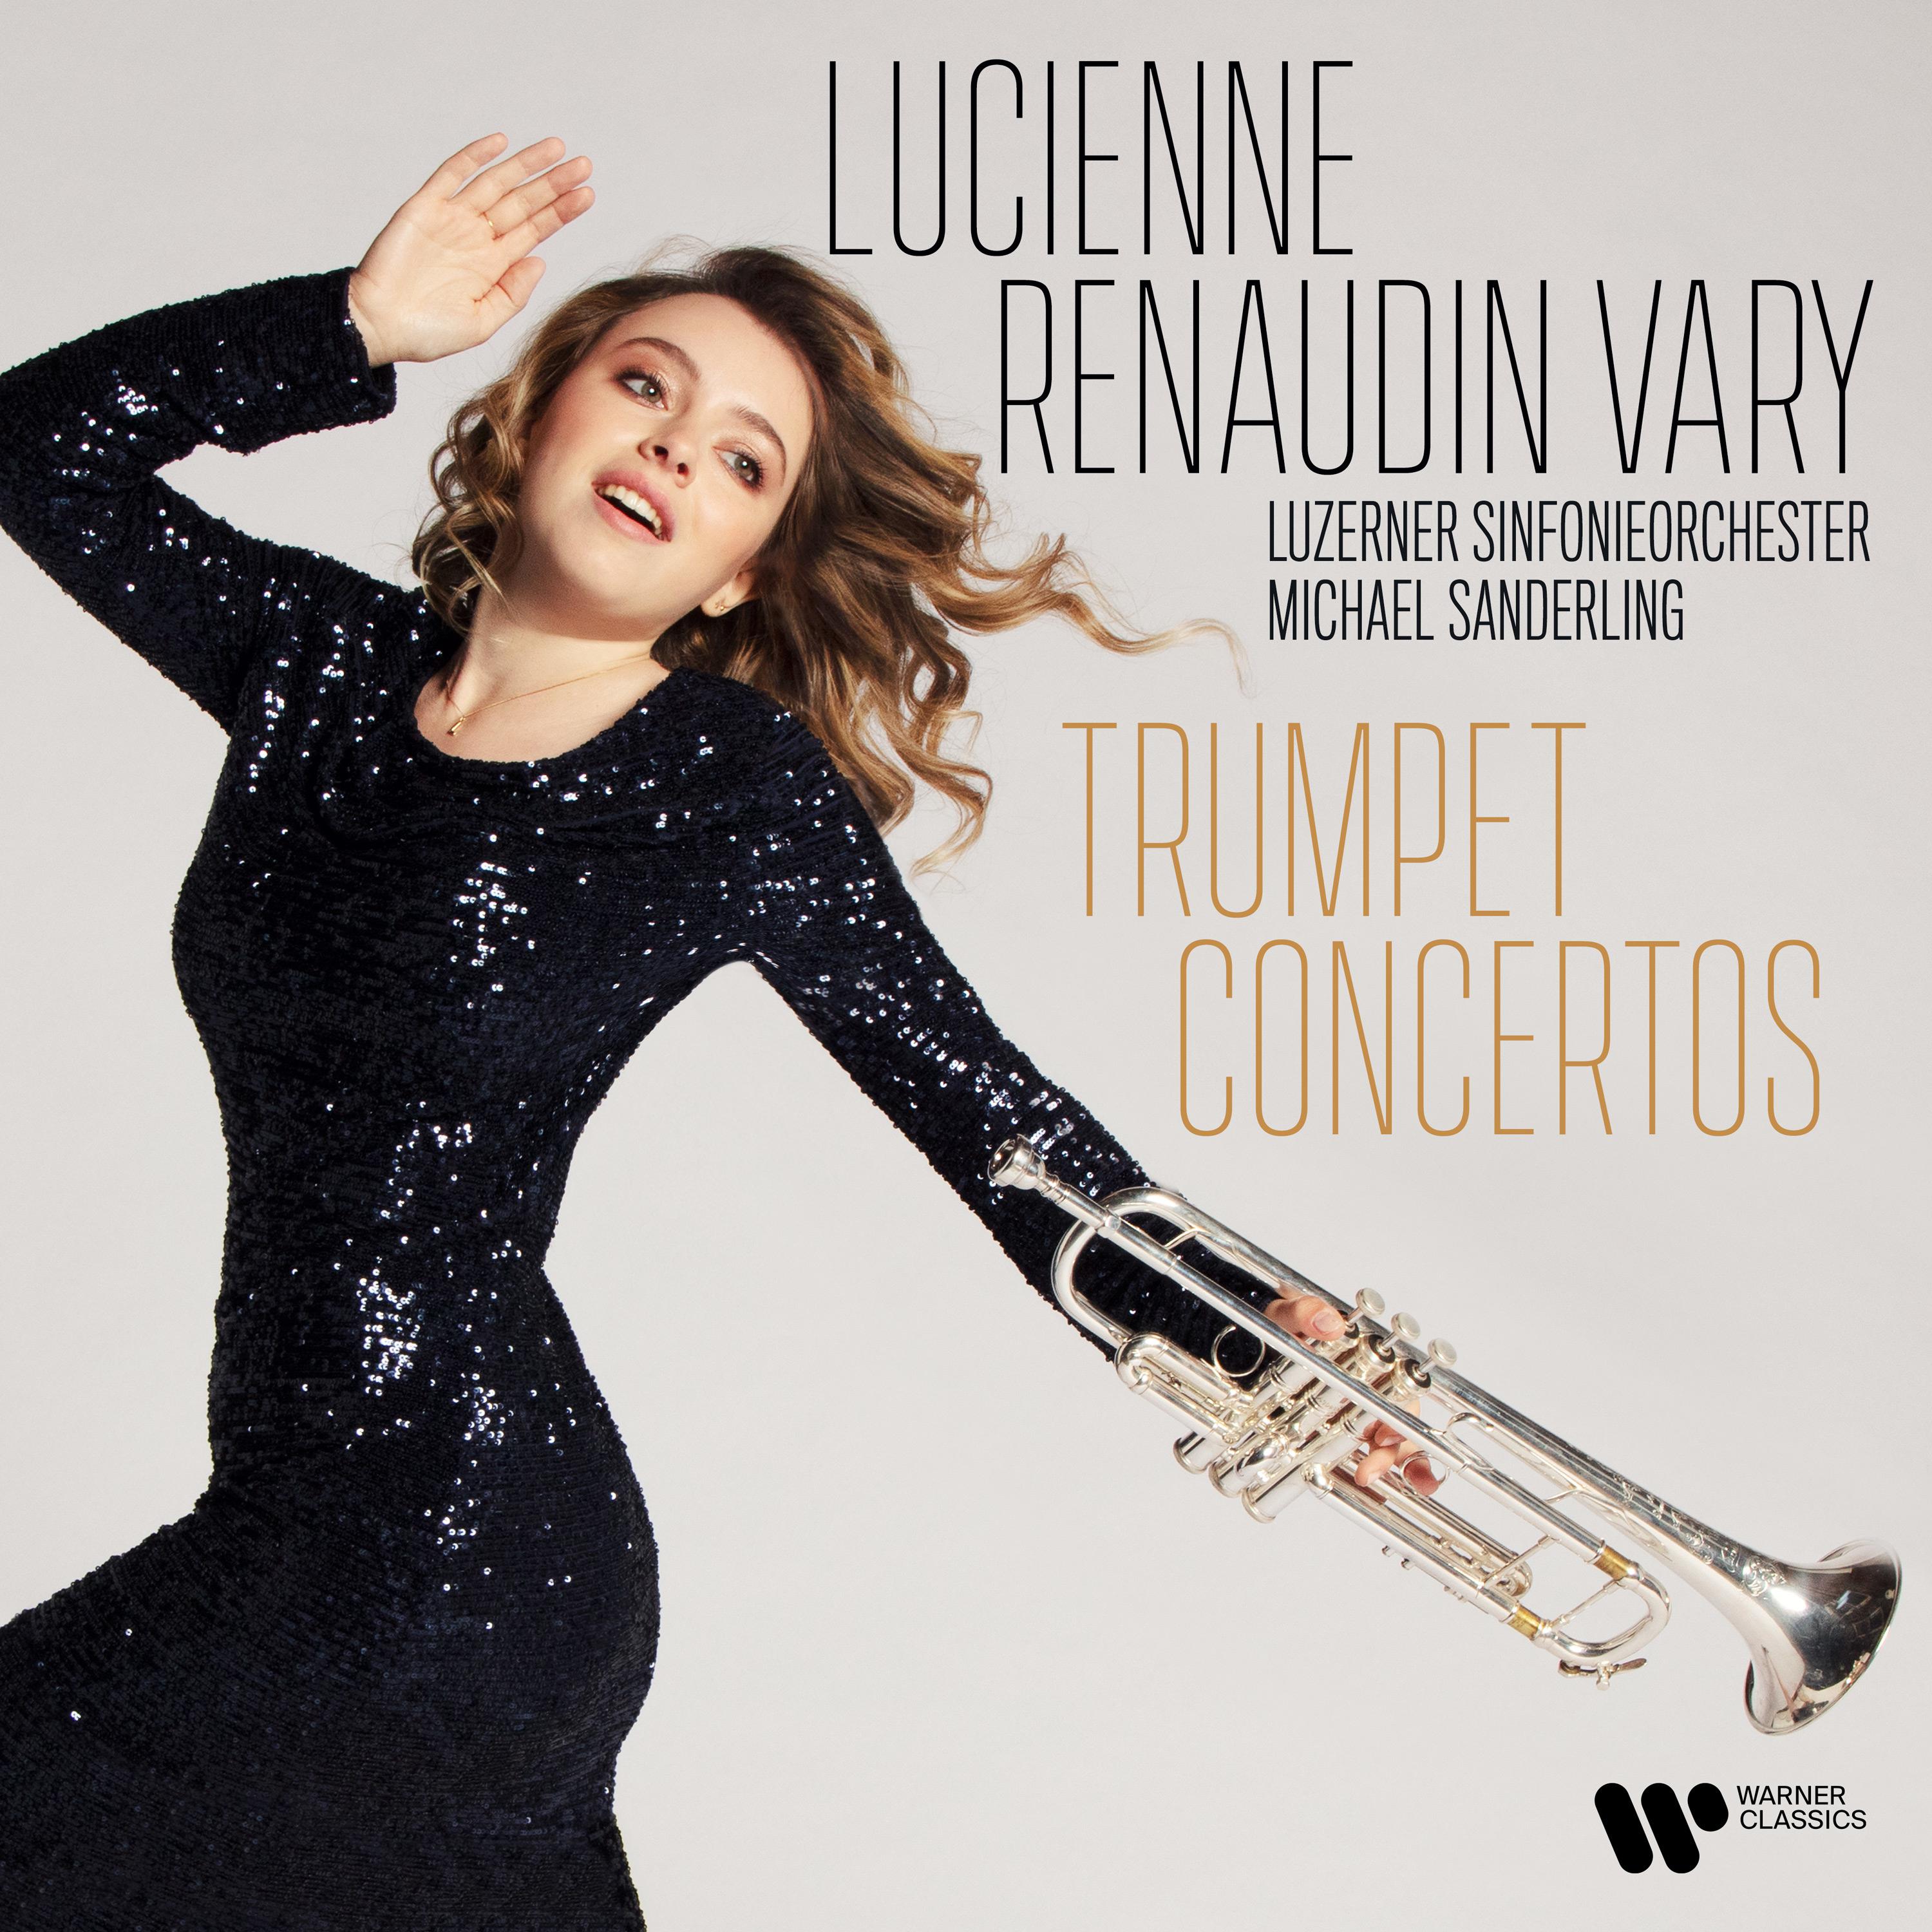 Lucienne Renaudin Vary - Trumpet Concerto in E-Flat Major, Hob. VIIe:1: III. Finale. Allegro